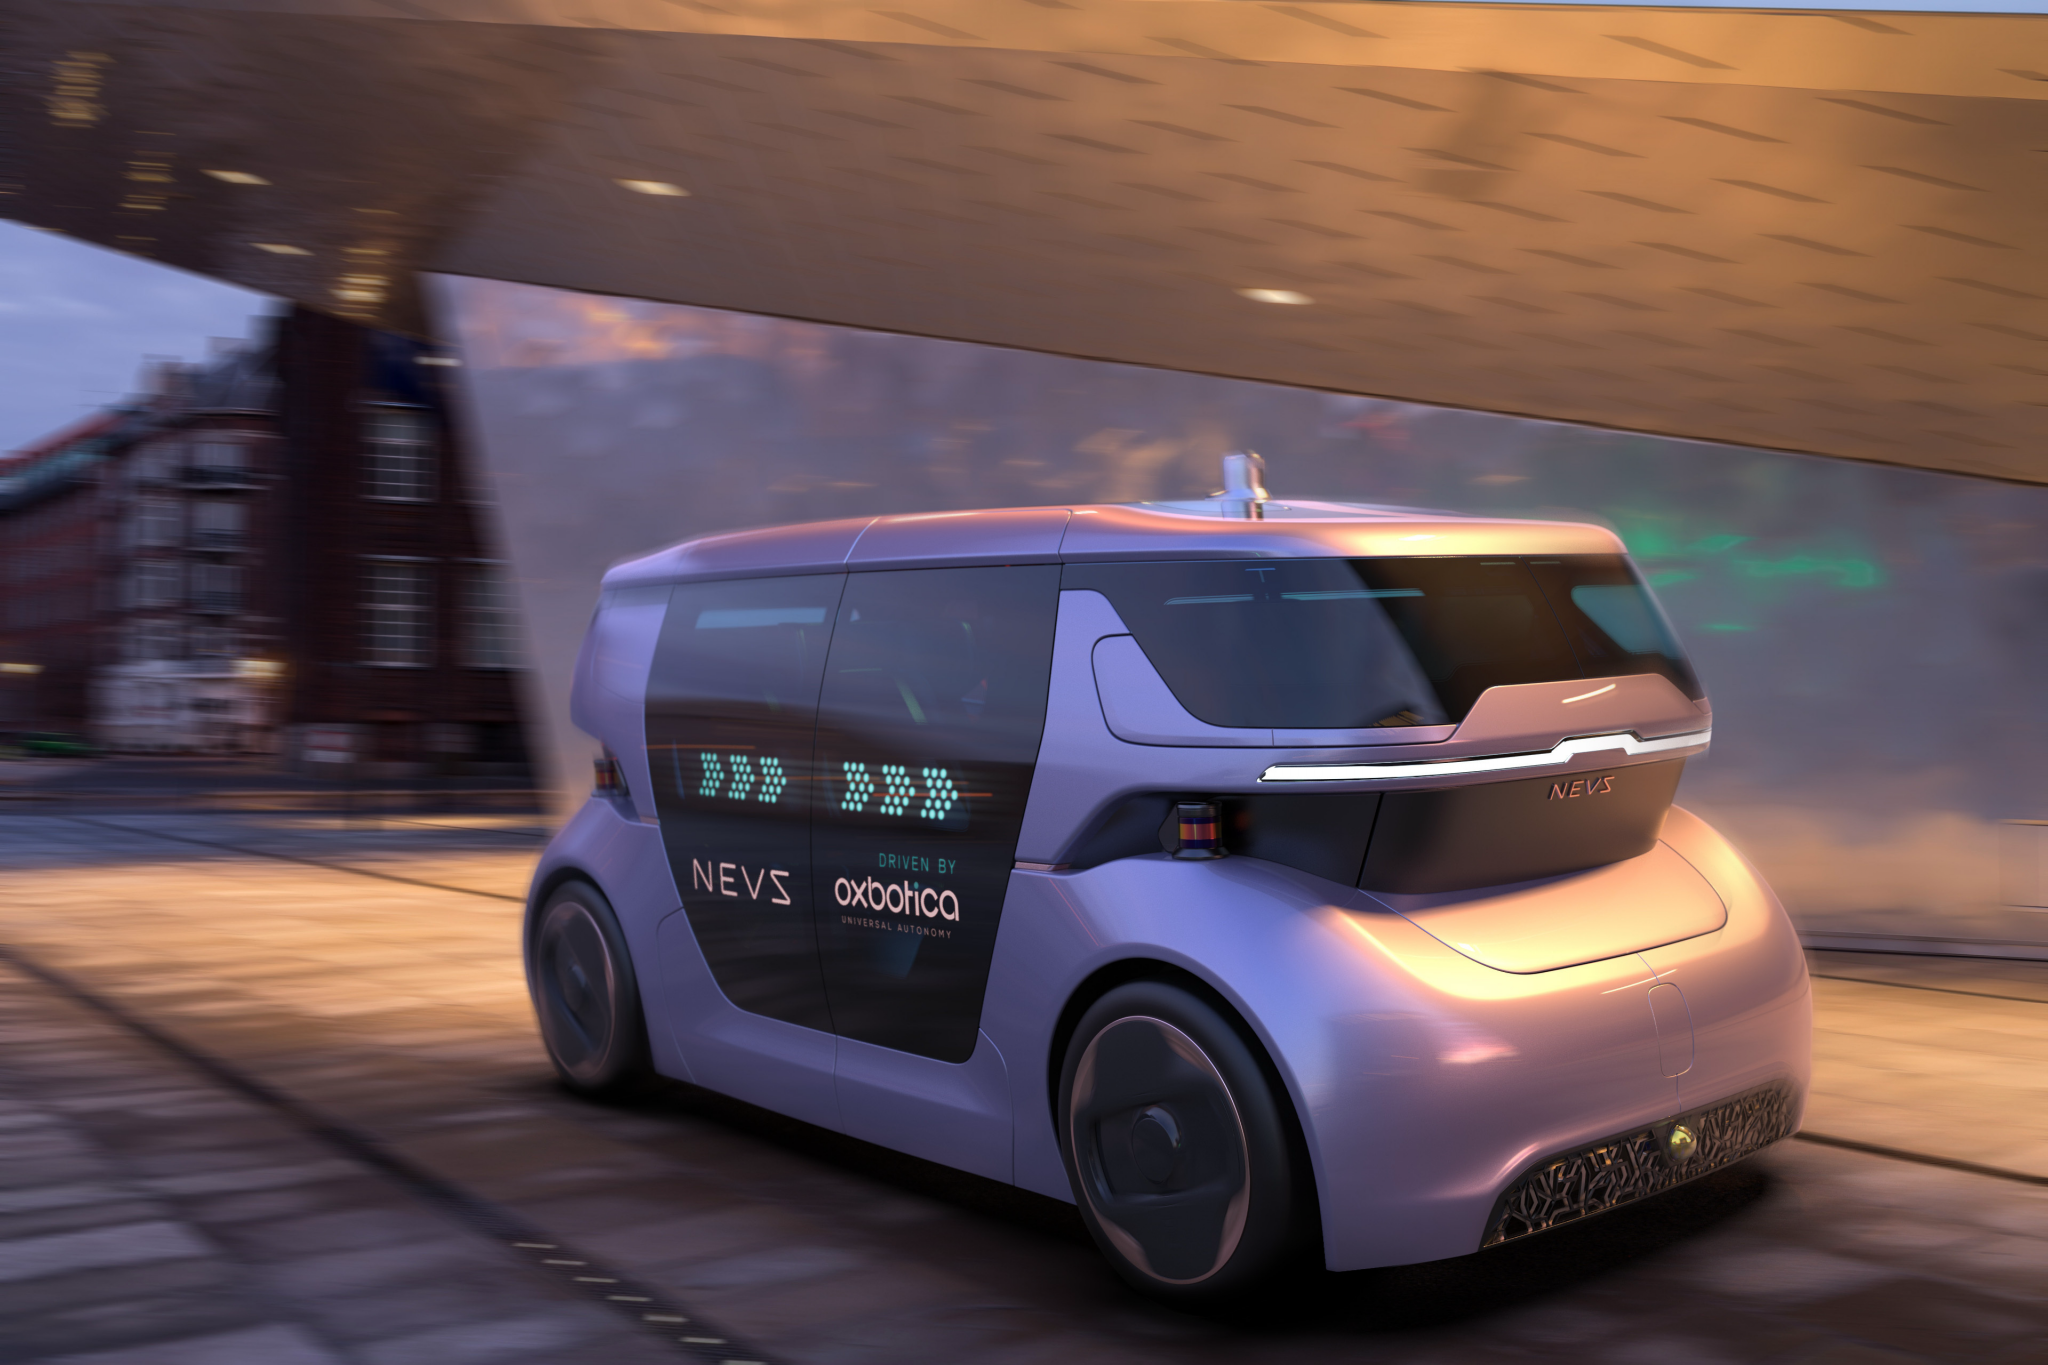 Fleet of Electric Autonomous Vehicles Readying to Hit the Road